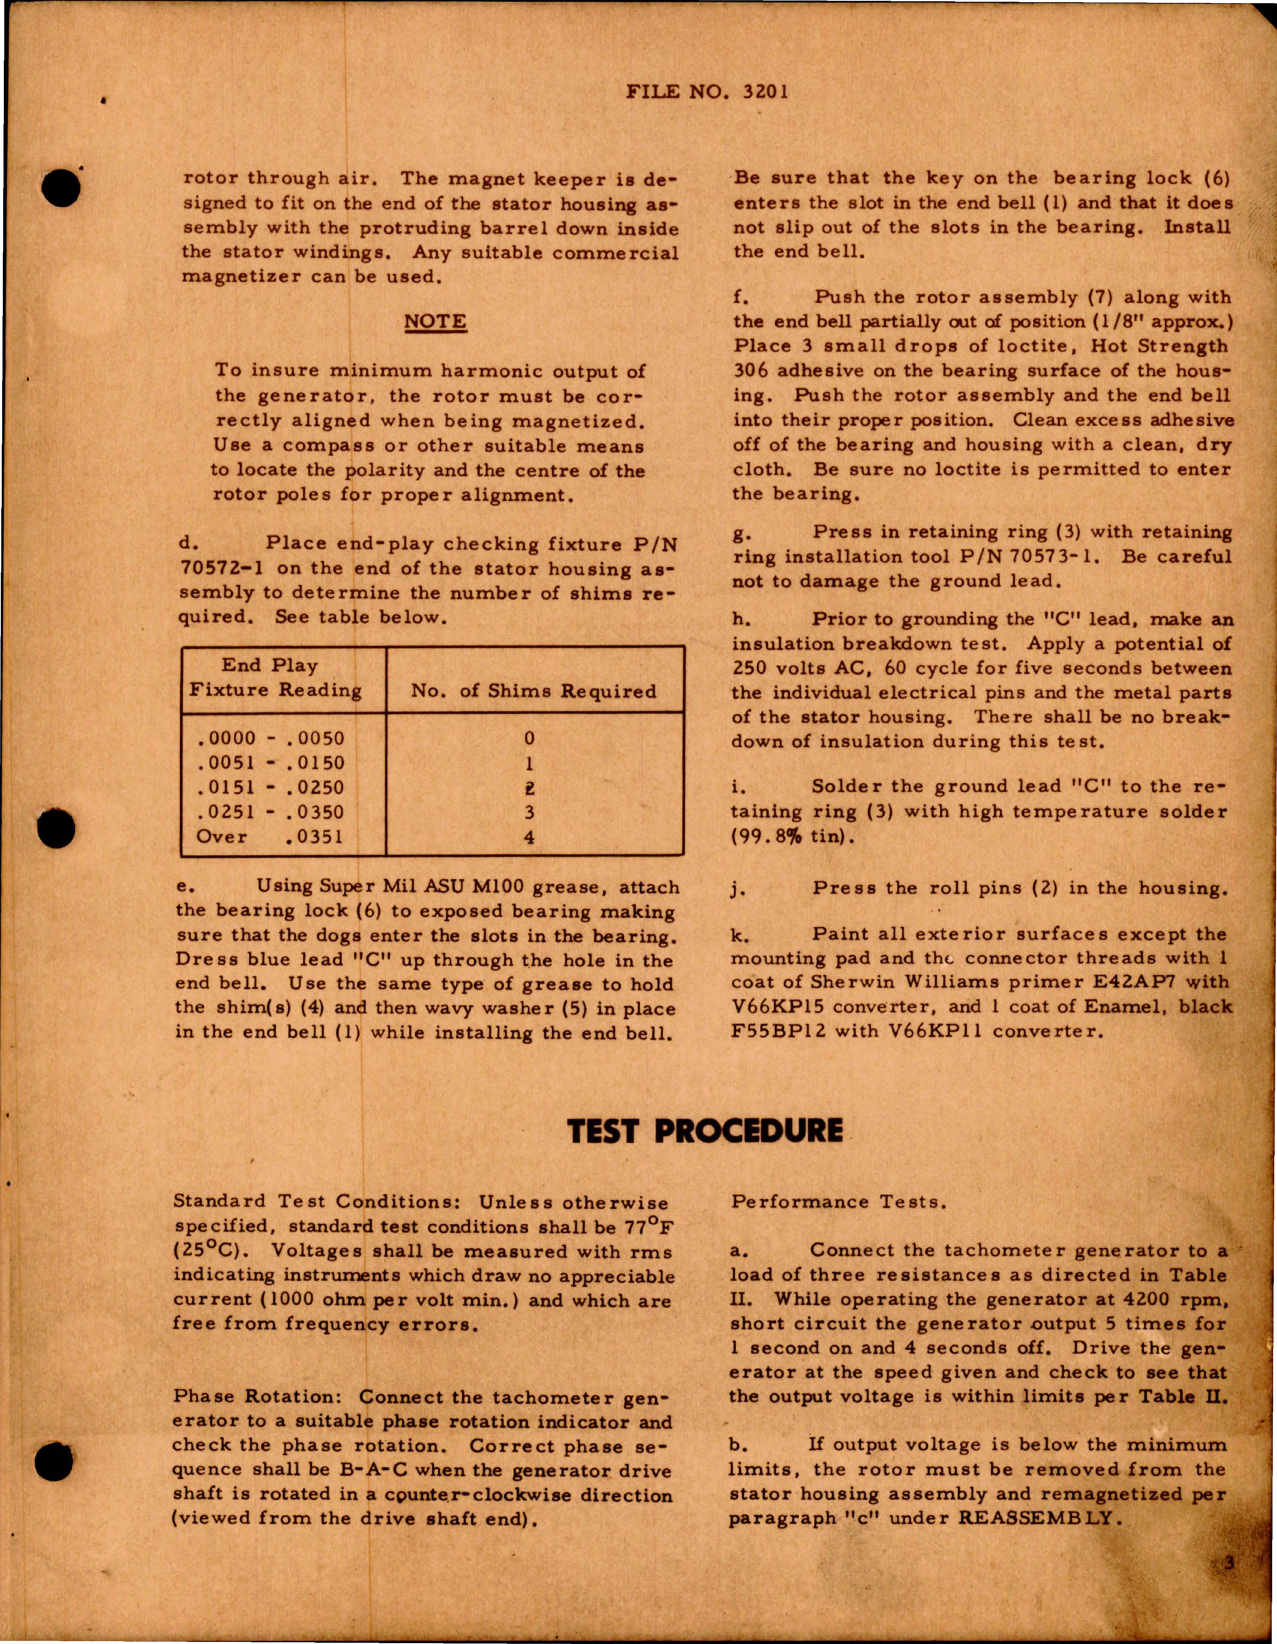 Sample page 7 from AirCorps Library document: Overhaul Instructions with Parts for Tachometer Generator - Model 32005-005